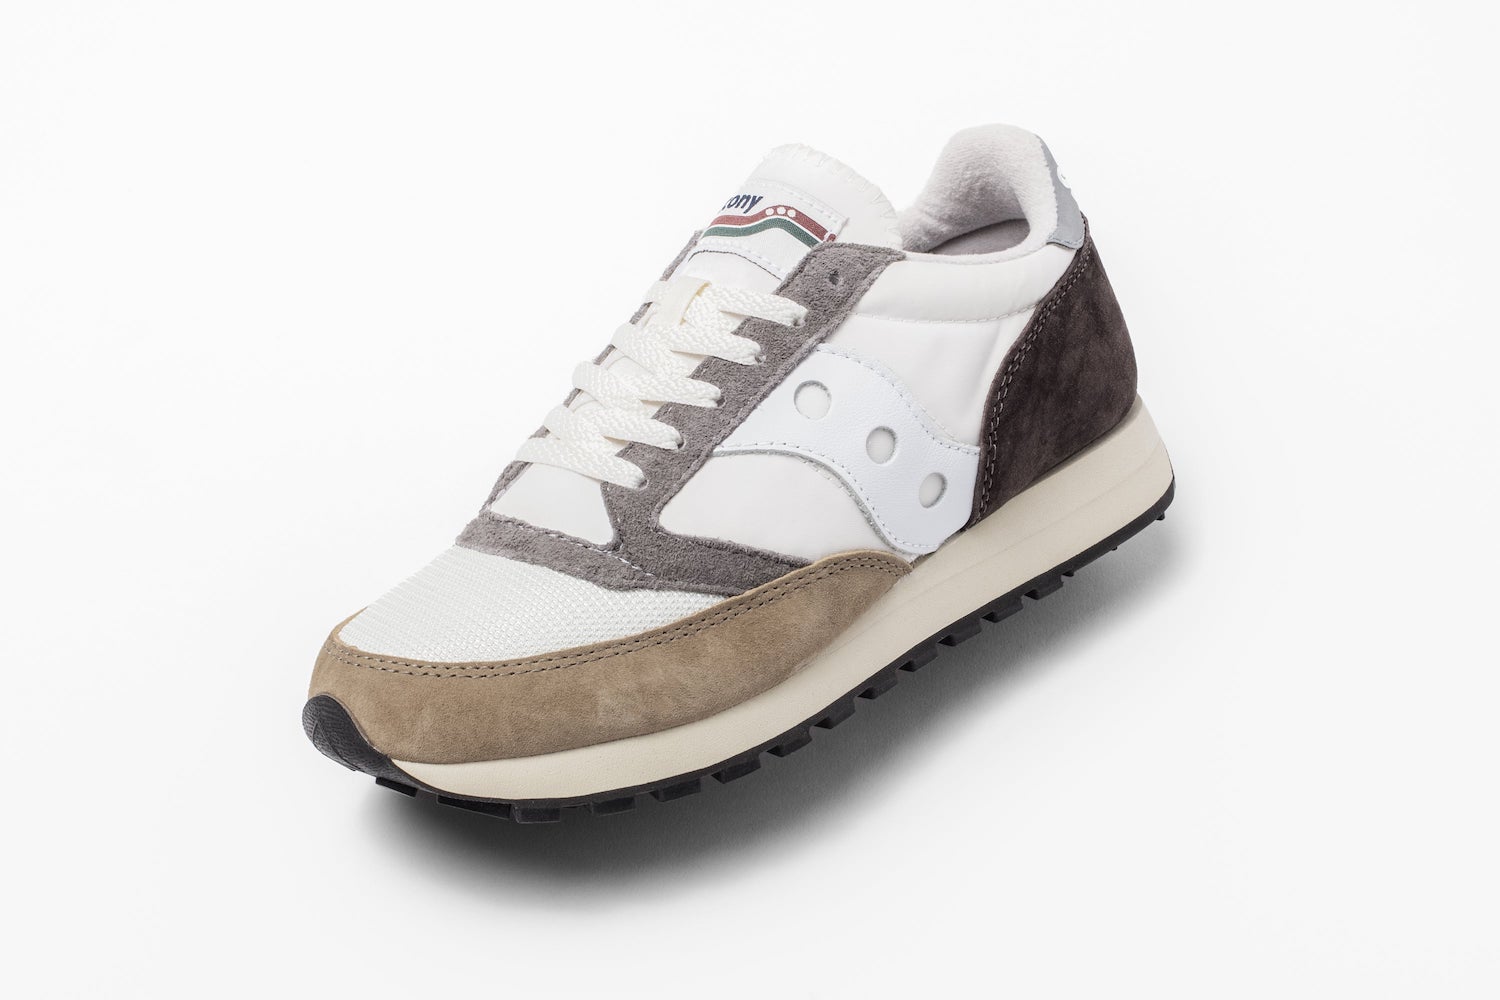 Packer Shoes x Saucony Jazz 81 Fall 2022 4